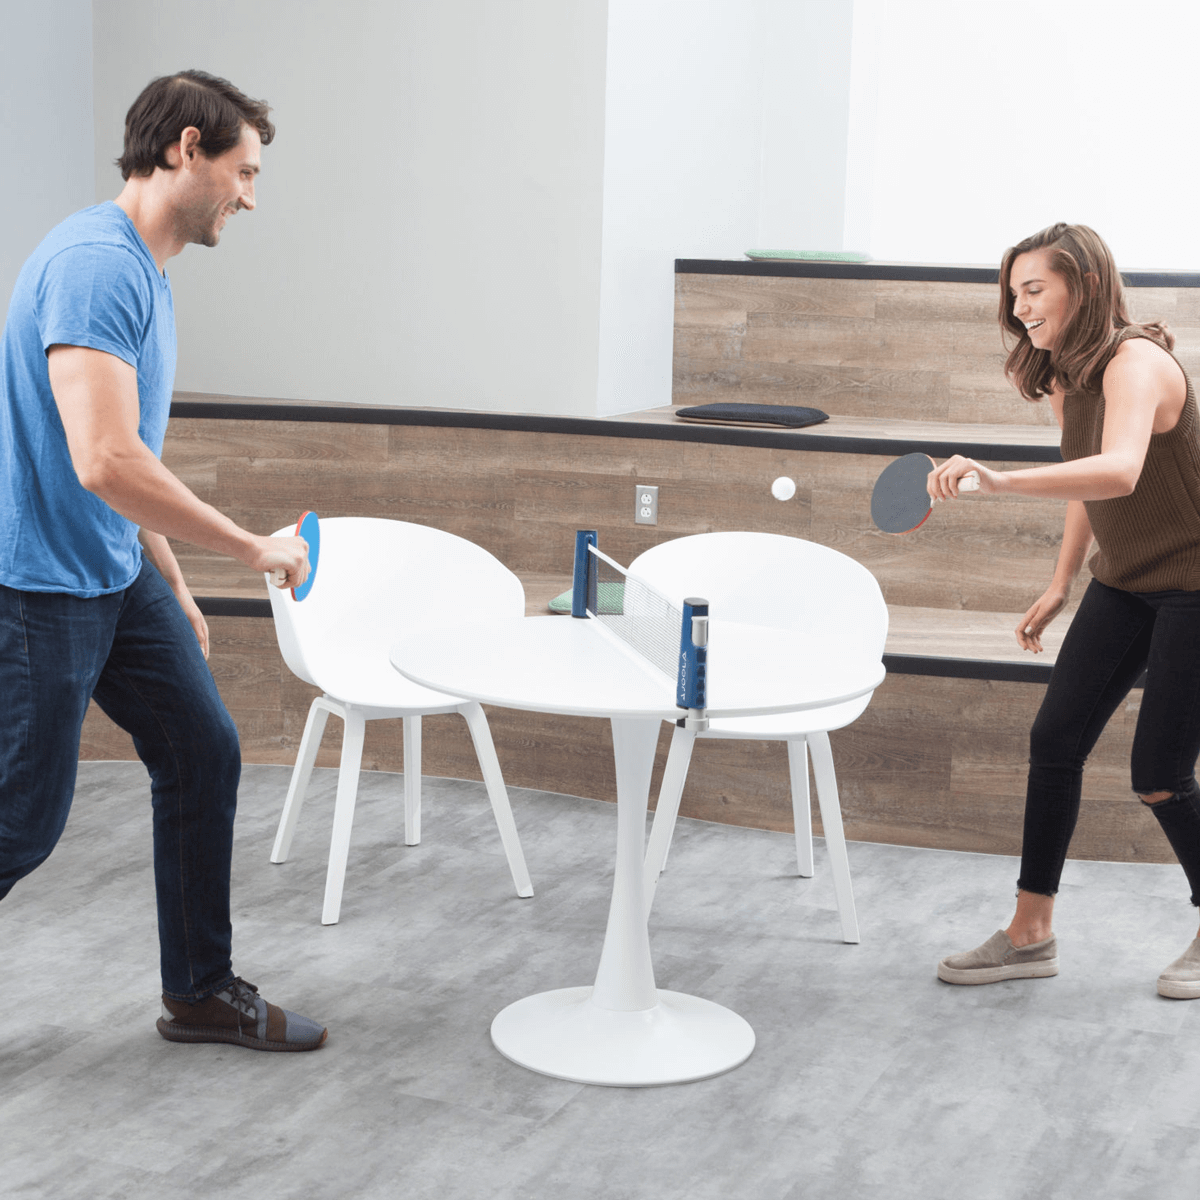 Image: A man and a woman playing table tennis on a small, round cafeteria table in an office setting with the JOOLA Essentials Variant Net Set set up on the table.